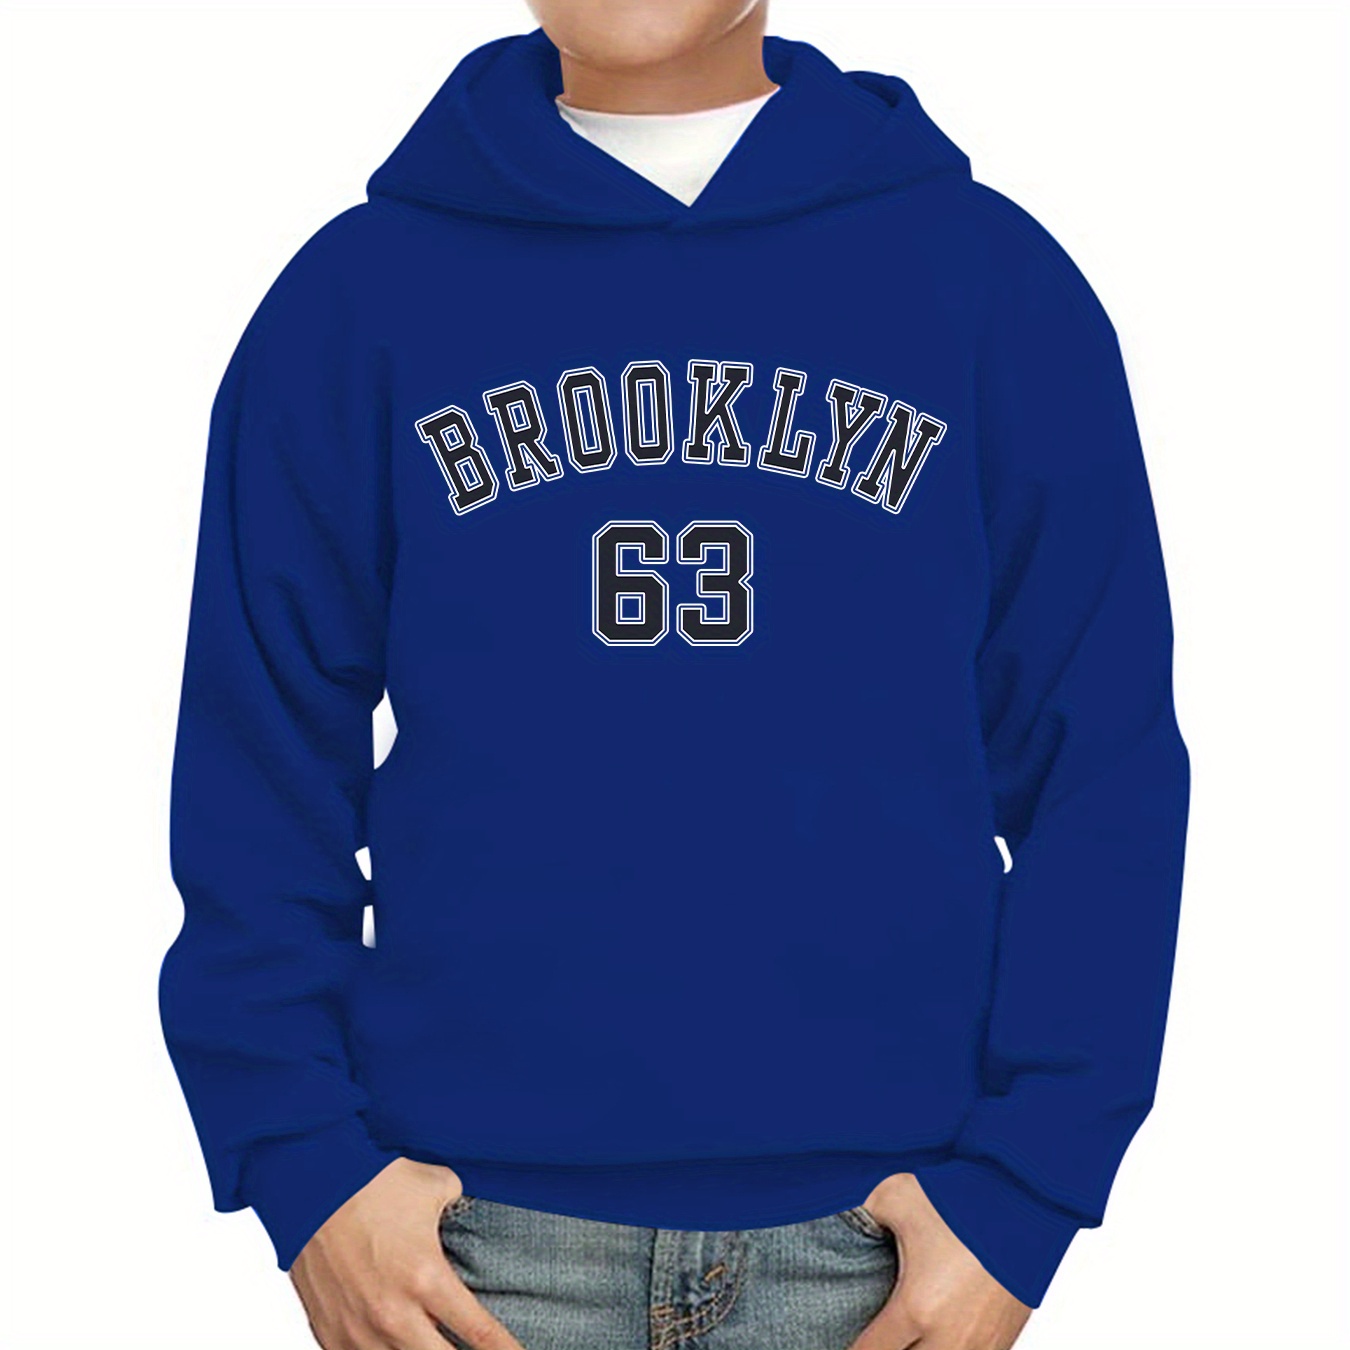 

Brooklyn Letter Print Hoodies For Boys - Casual Graphic Design With Stretch Fabric For Comfortable Autumn/winter Wear